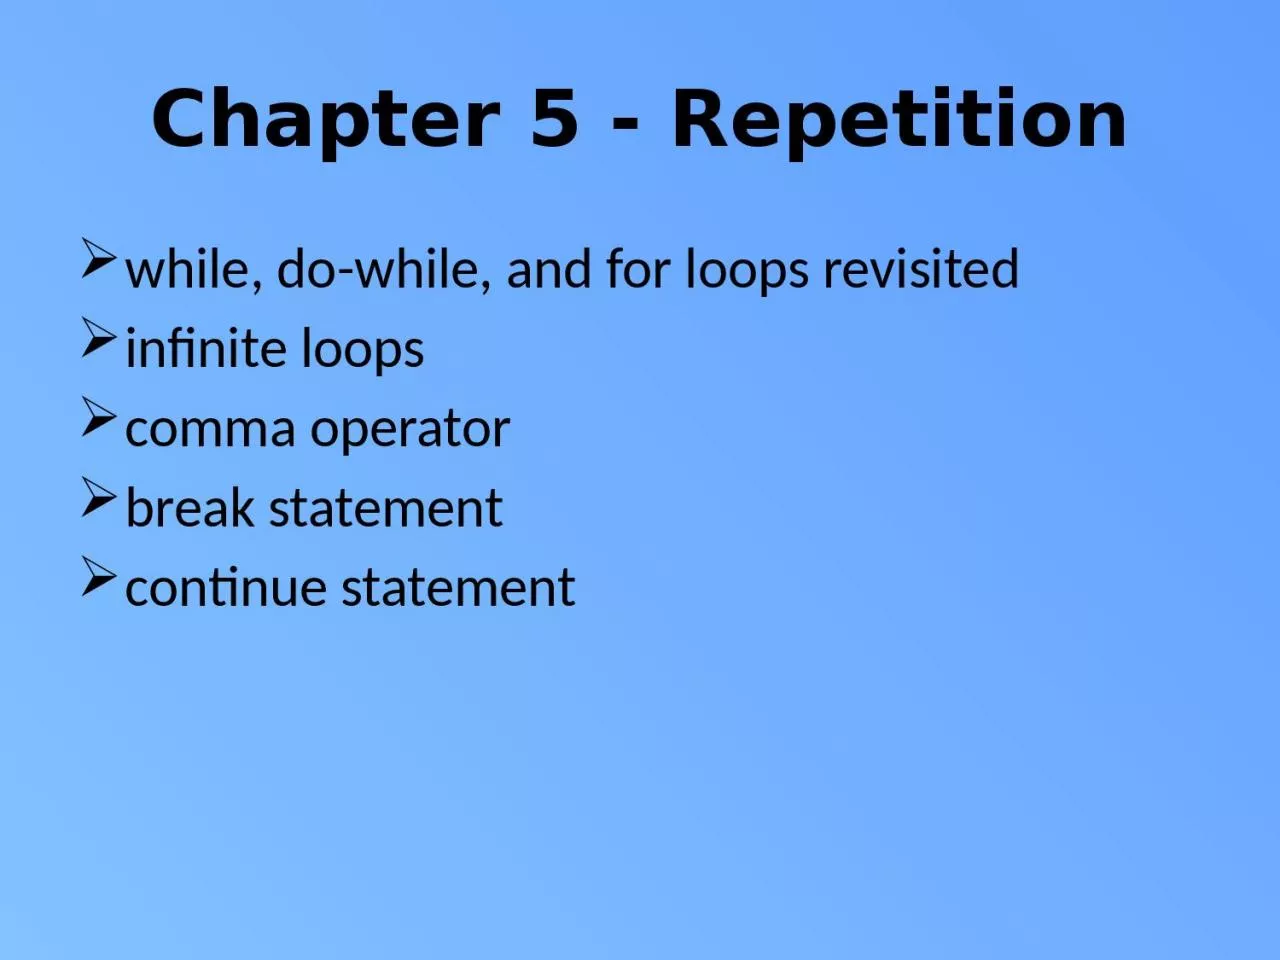 Chapter 5 - Repetition while, do-while, and for loops revisited